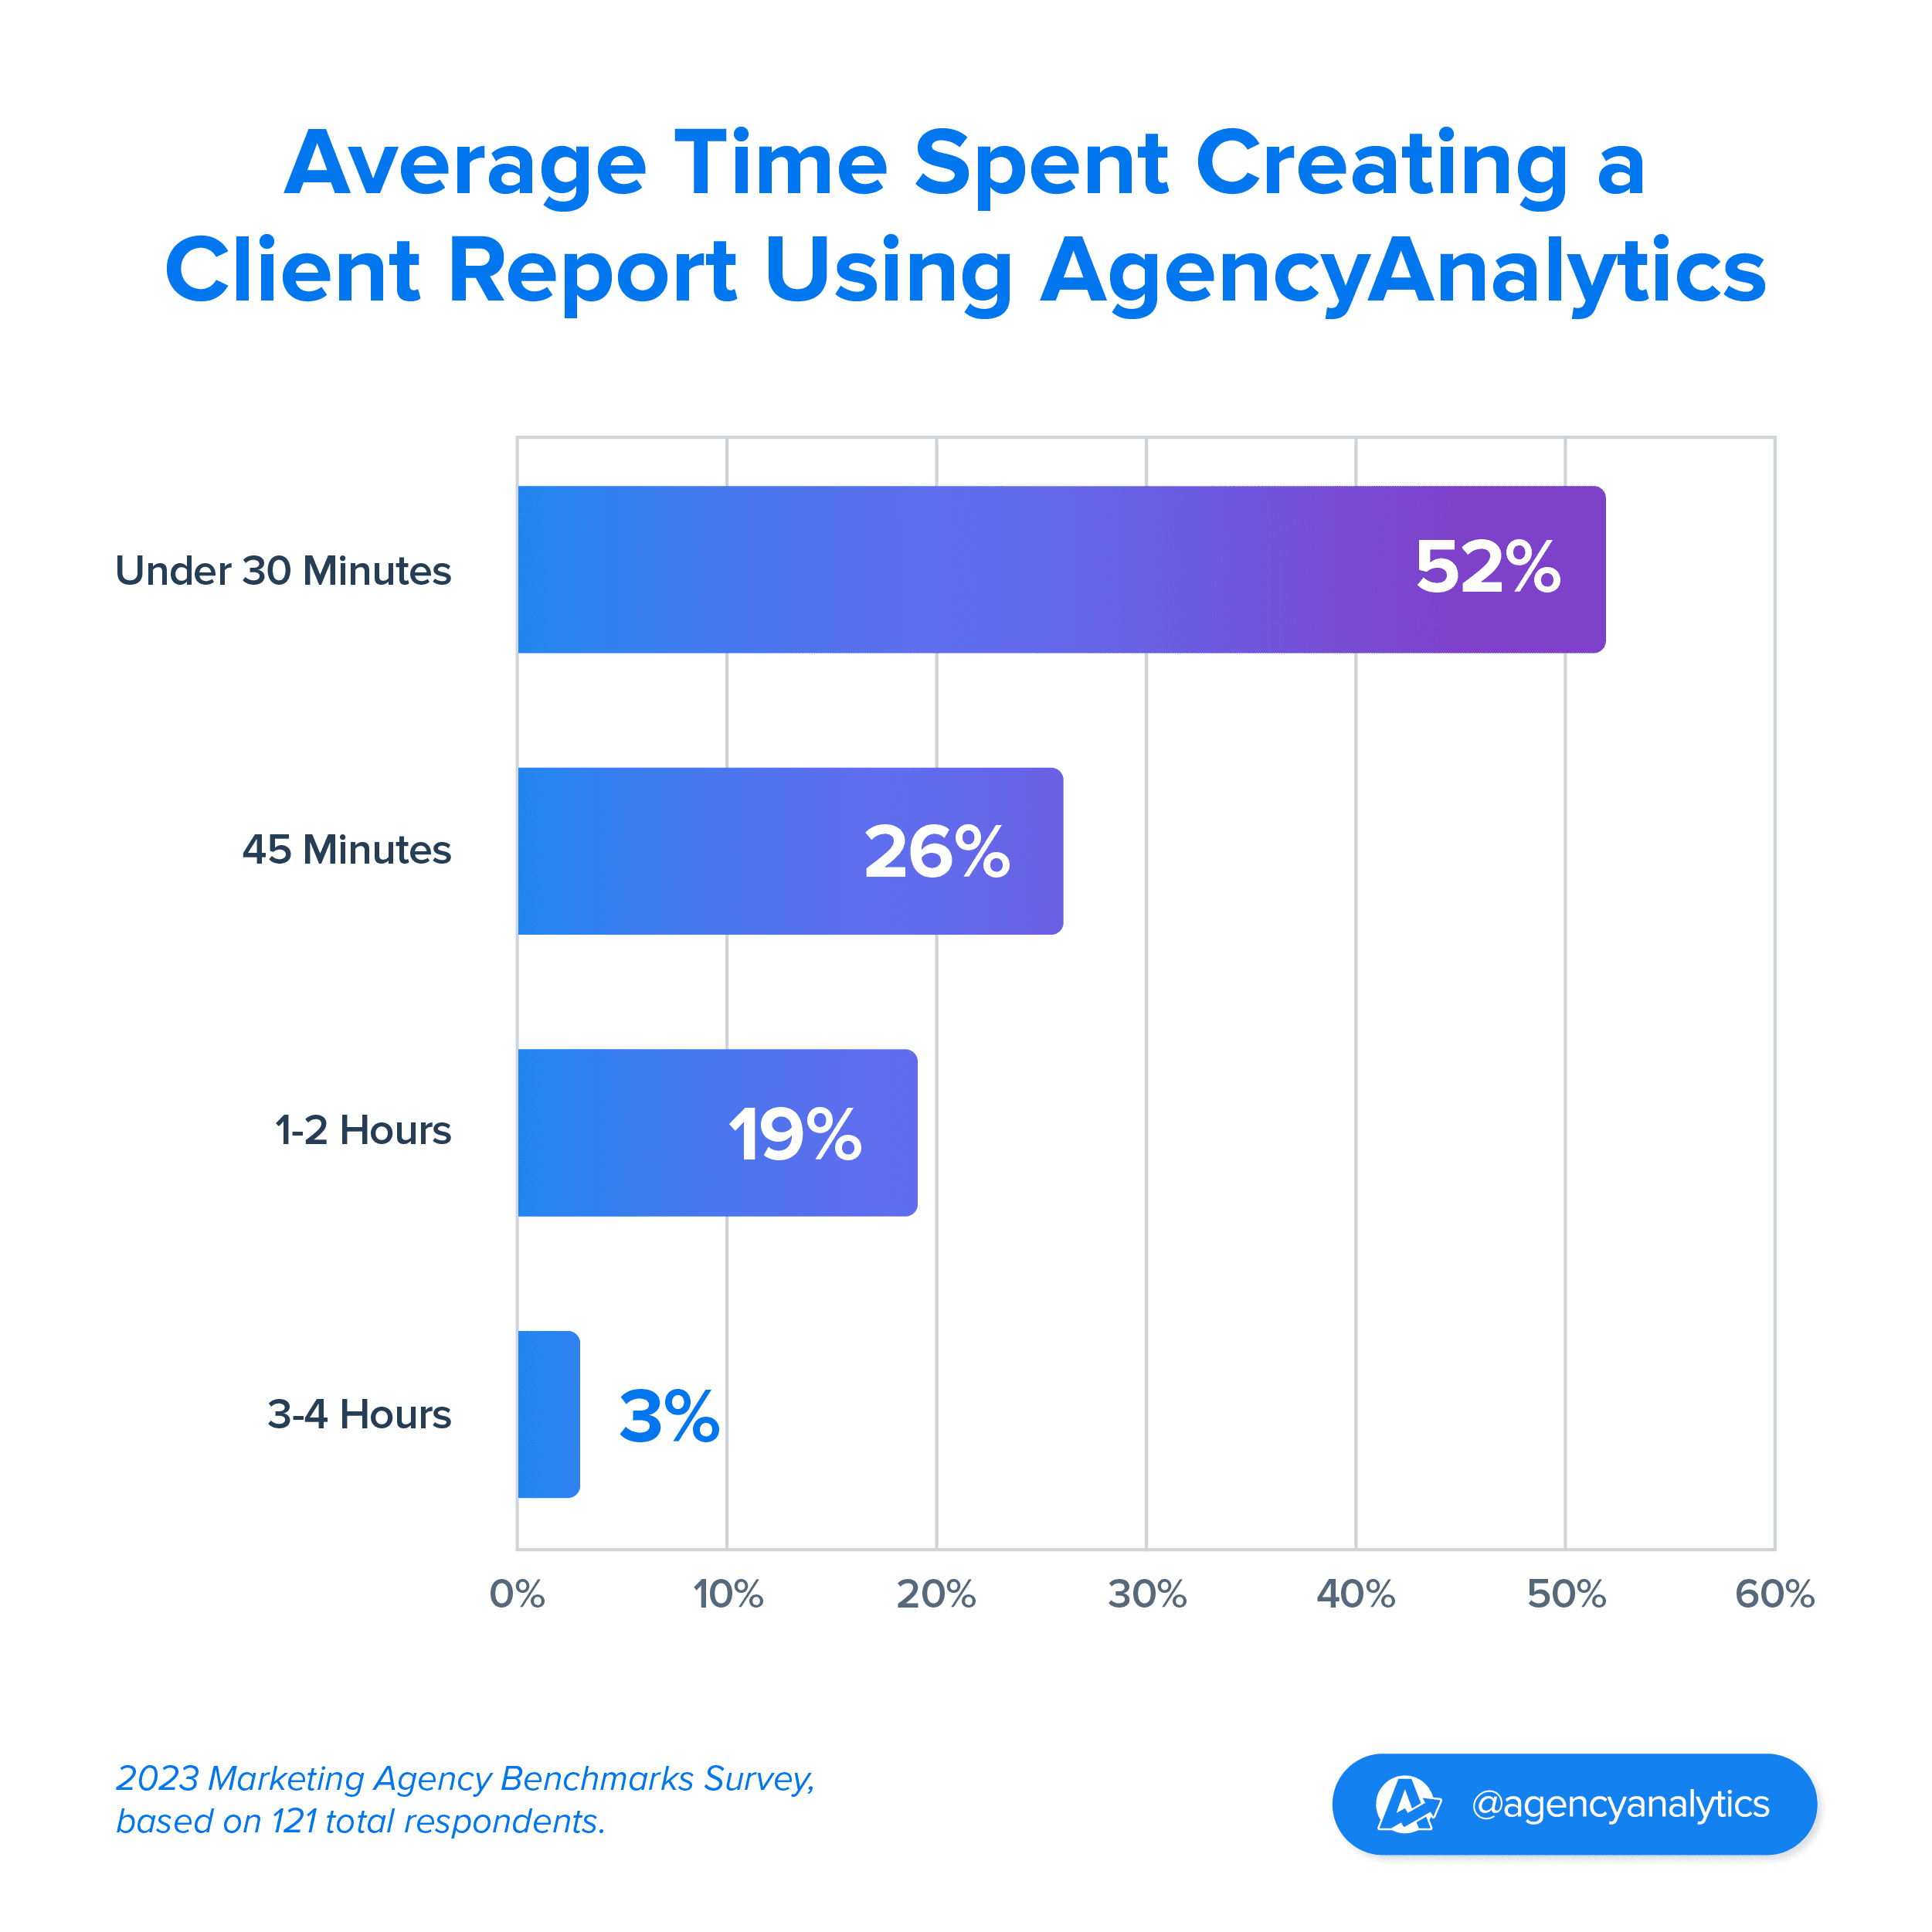 Average Time Spent Client Reporting Using AgencyAnalytics